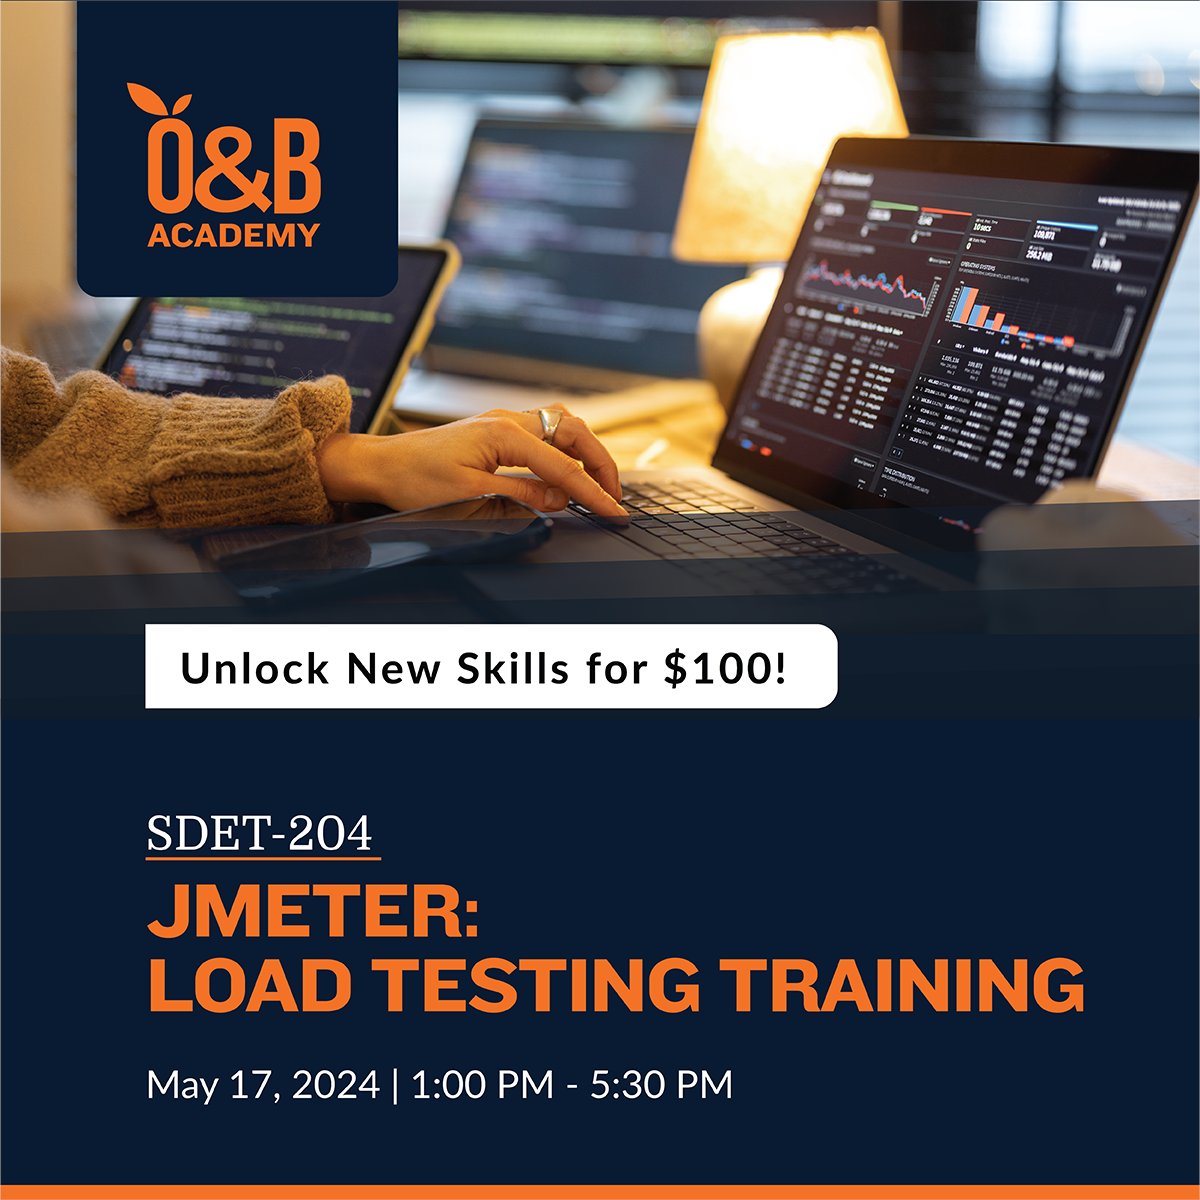 Transform into a software testing pro with our SDET-204 course! Sign up now by emailing training-sales@orangeandbronze.com #professionalgrowth #onbtraining2024 #careerdevelopment #onlybetter #onbway